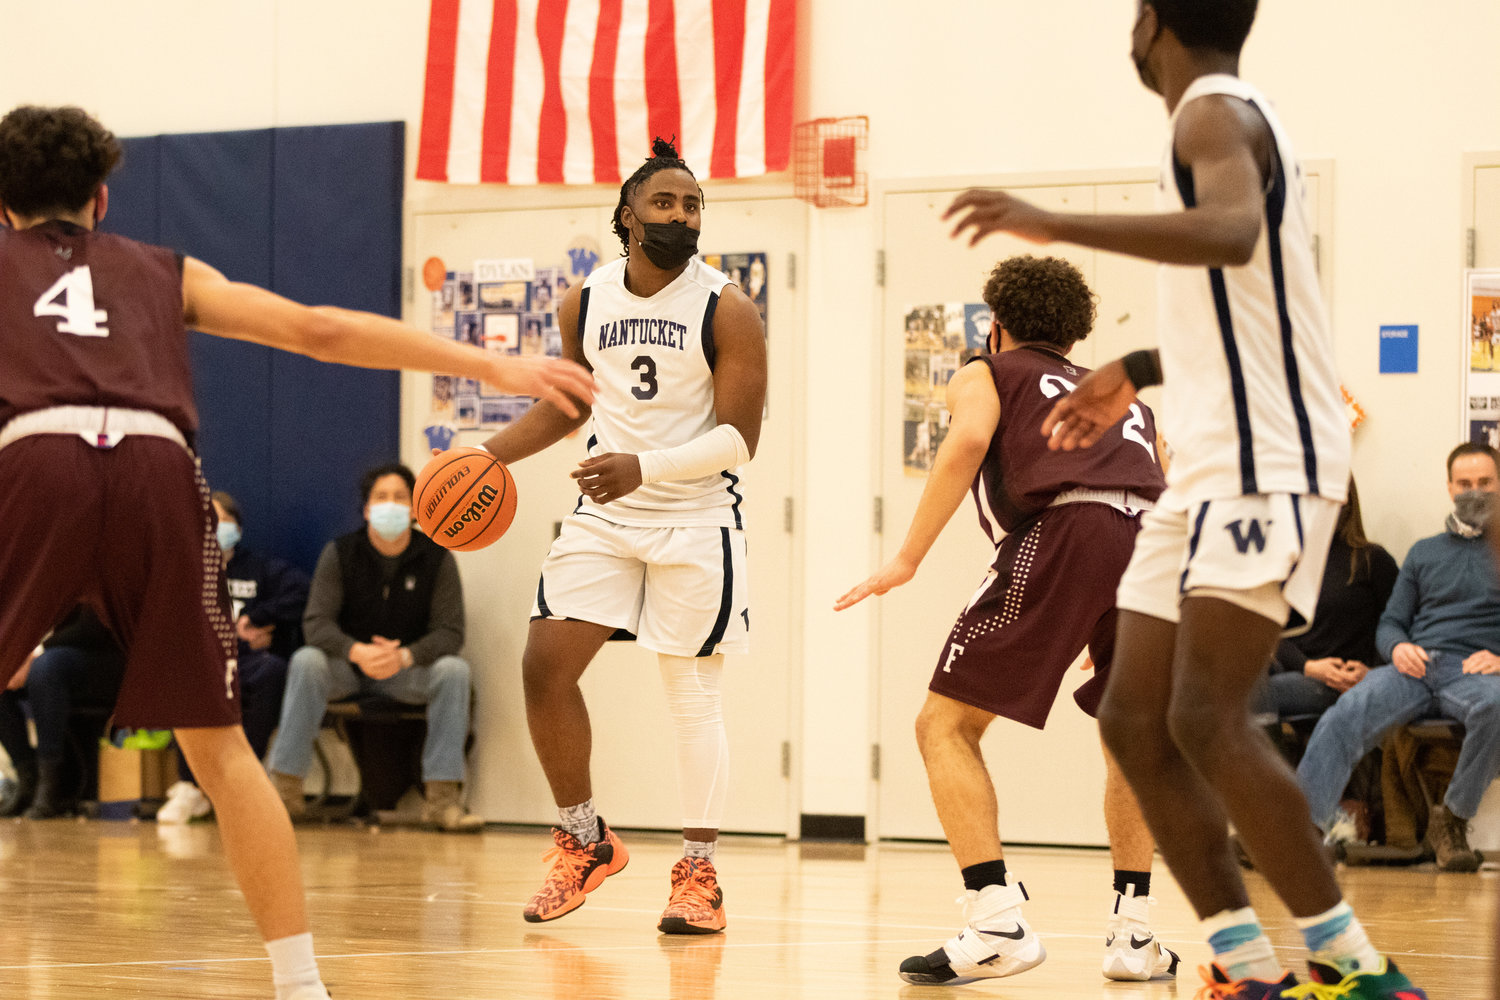 Malique Bodden against Falmouth